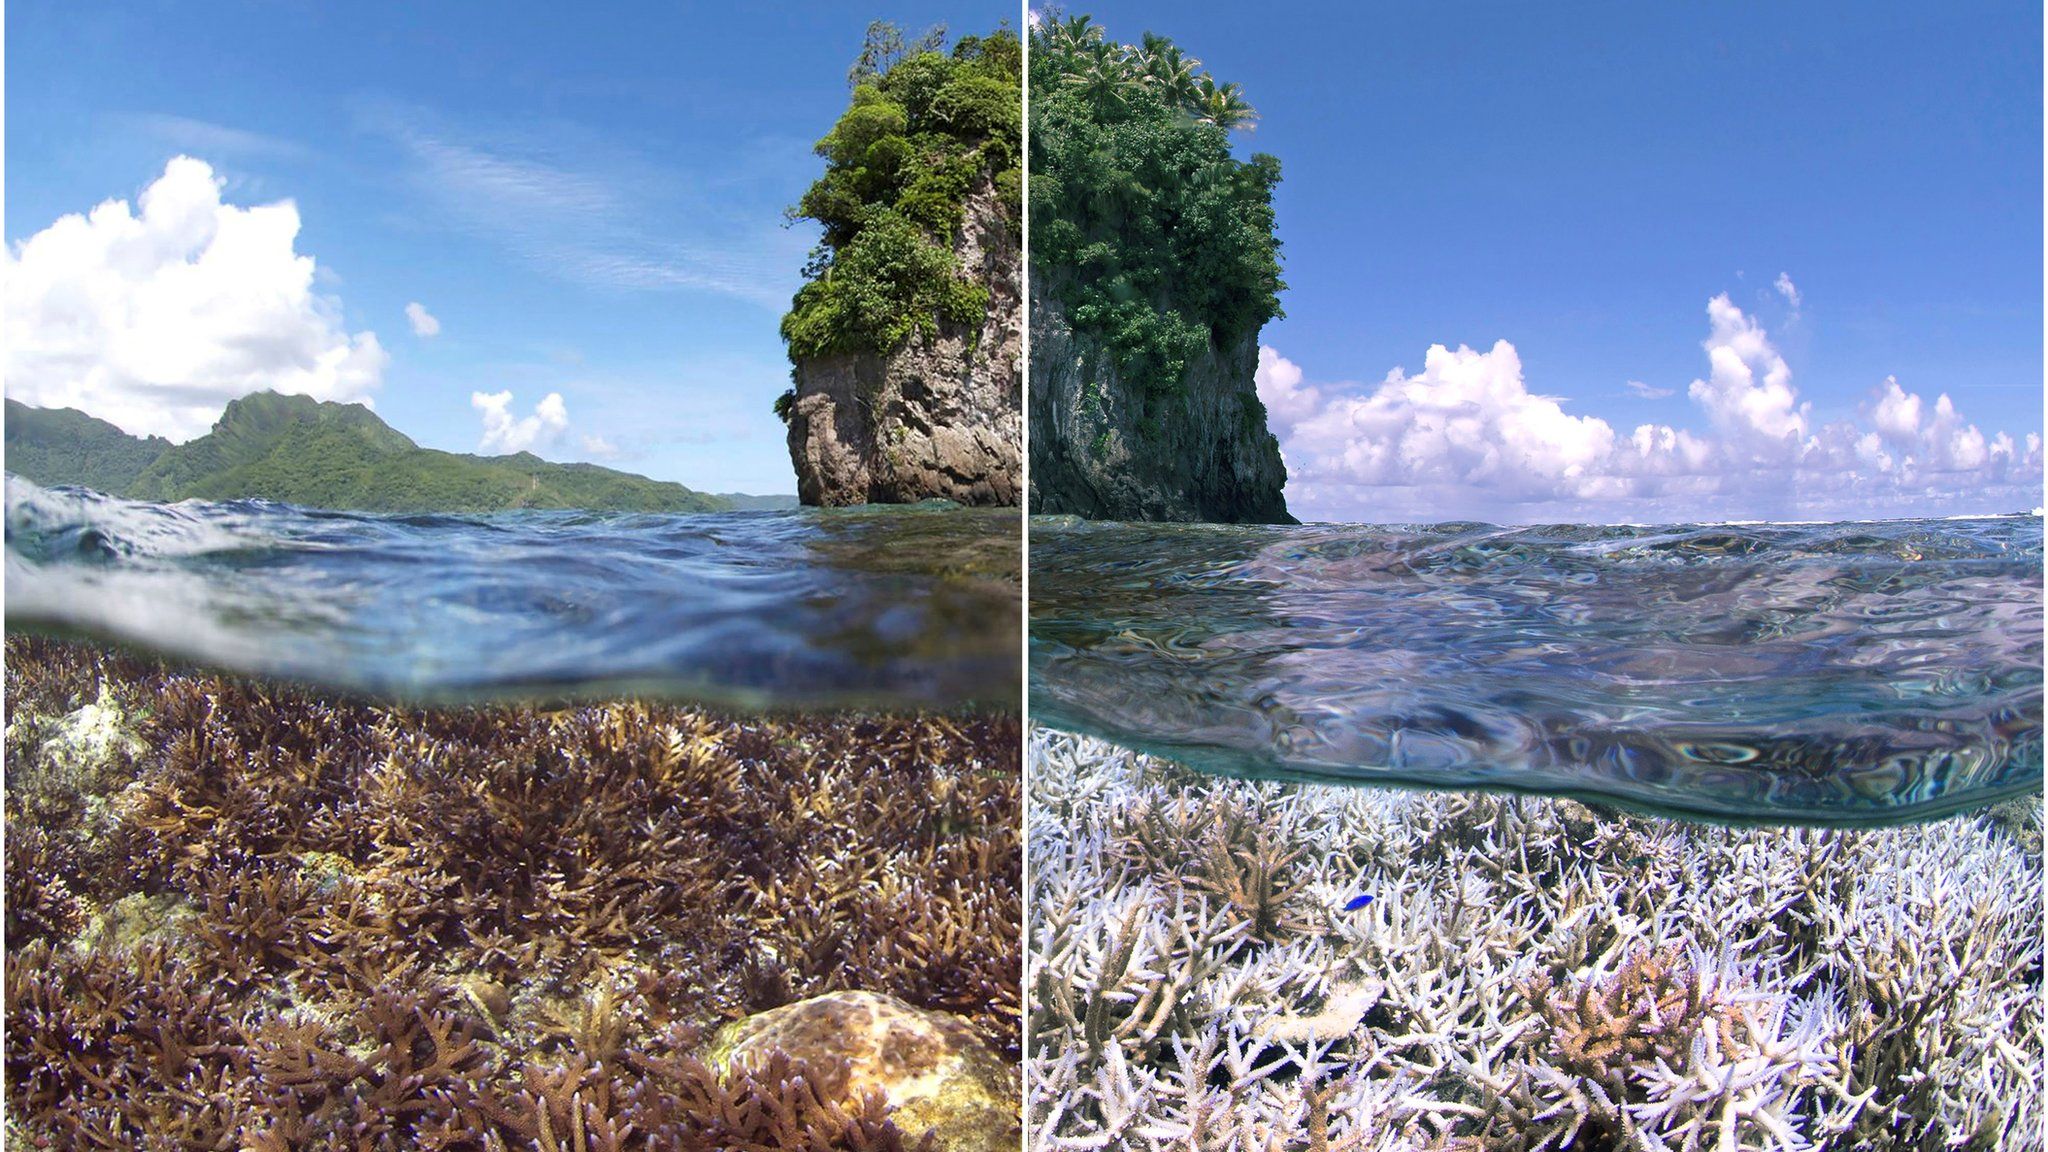 Coral bleaching event (right) in American Samoa (Image courtesy of The Ocean Agency)